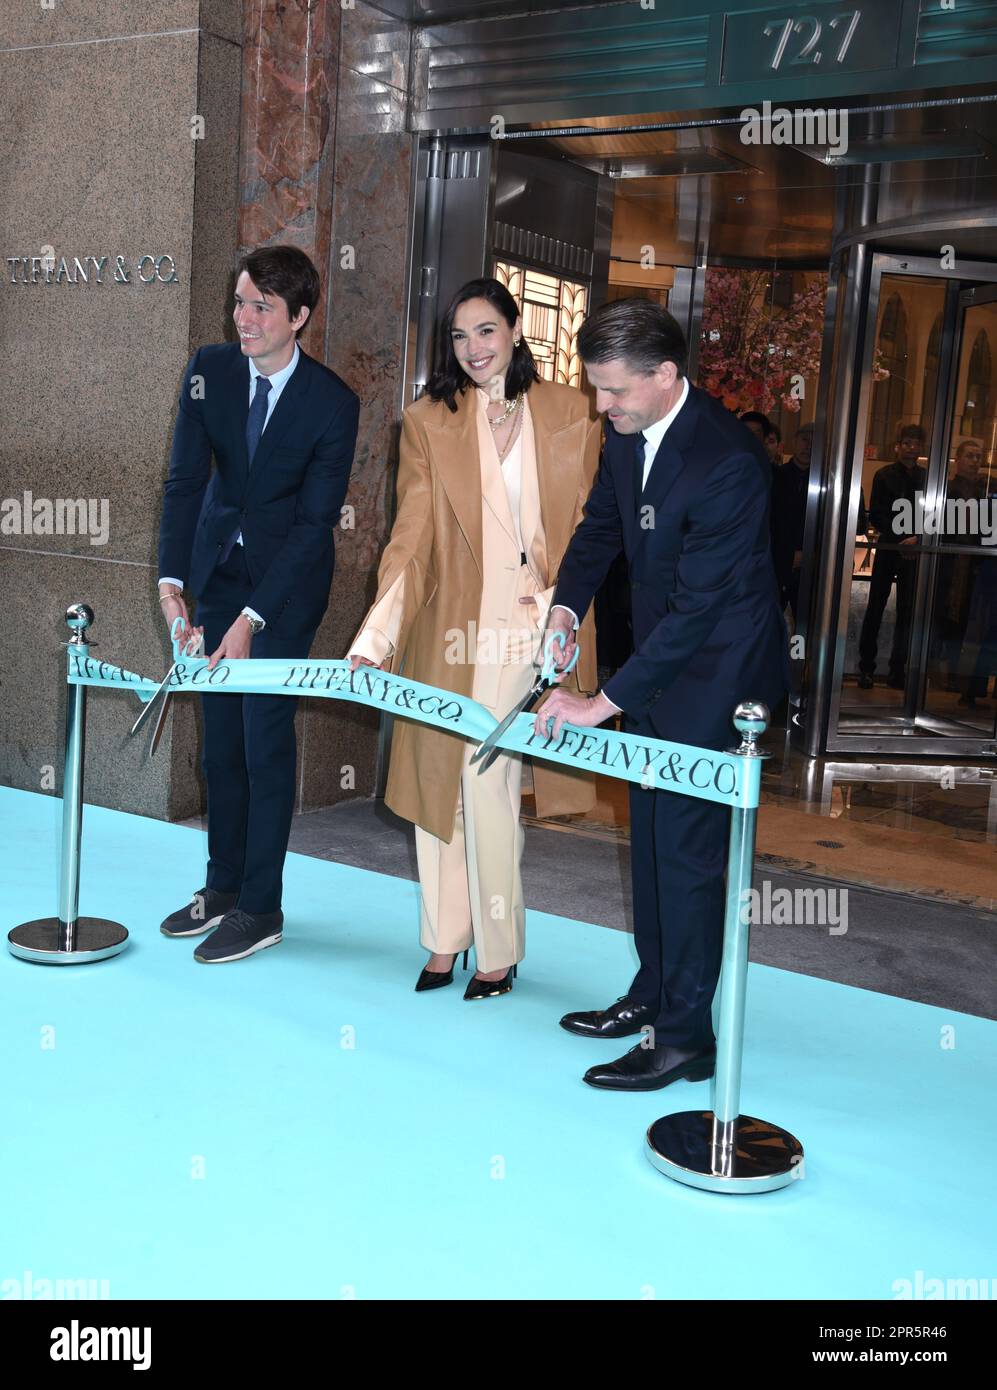 Alexandre Arnault and Geraldine Guyot attend as Tiffany & Co